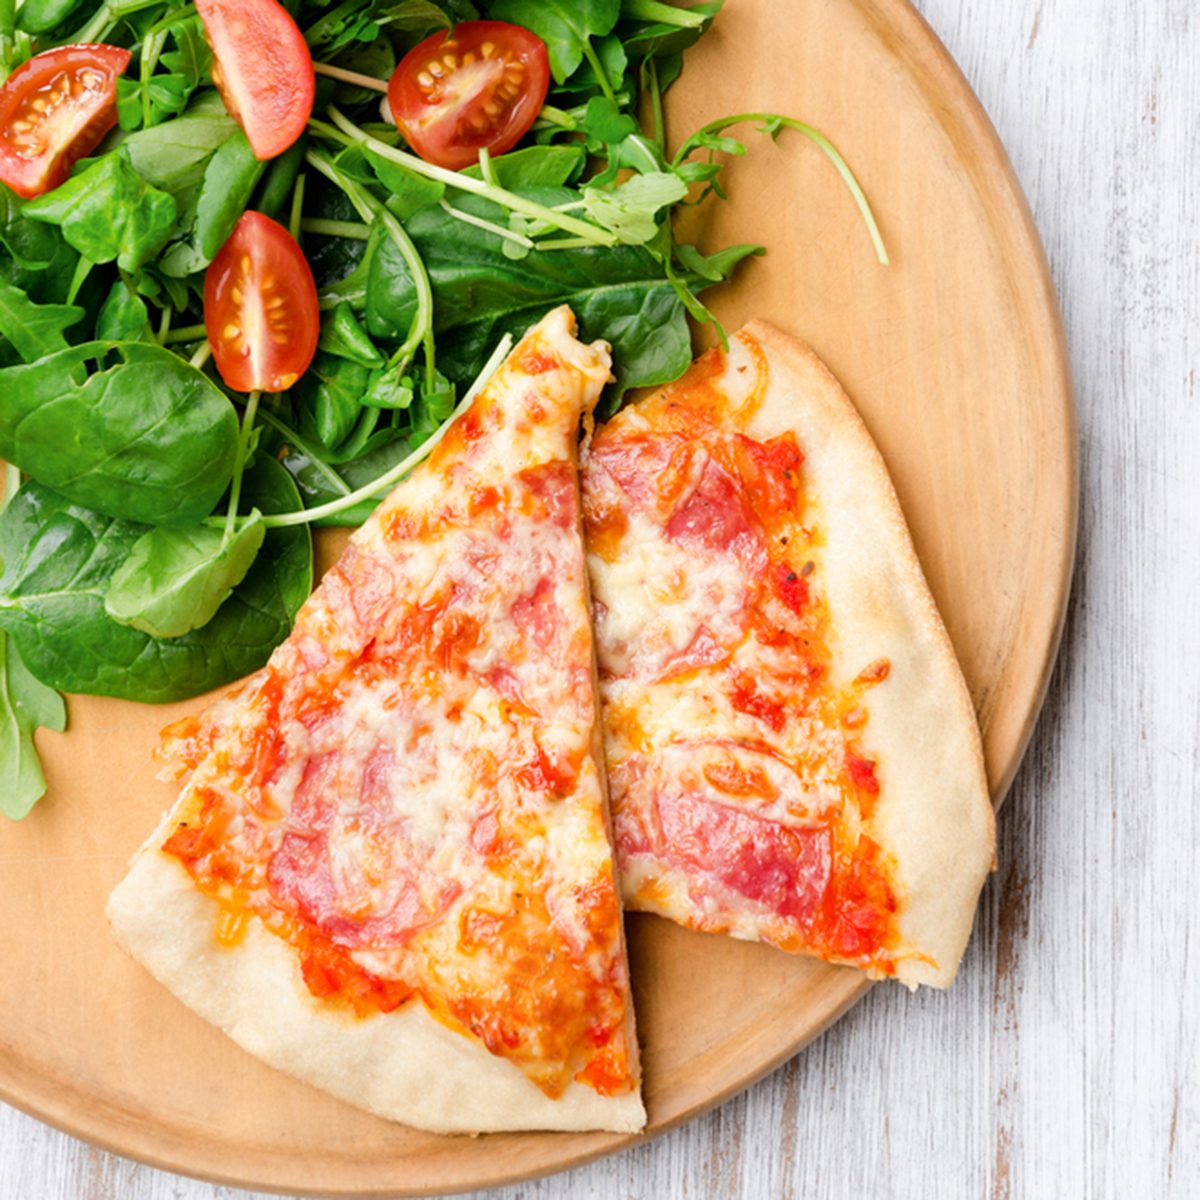 Pizza with salad for a balanced meal, overhead perspective